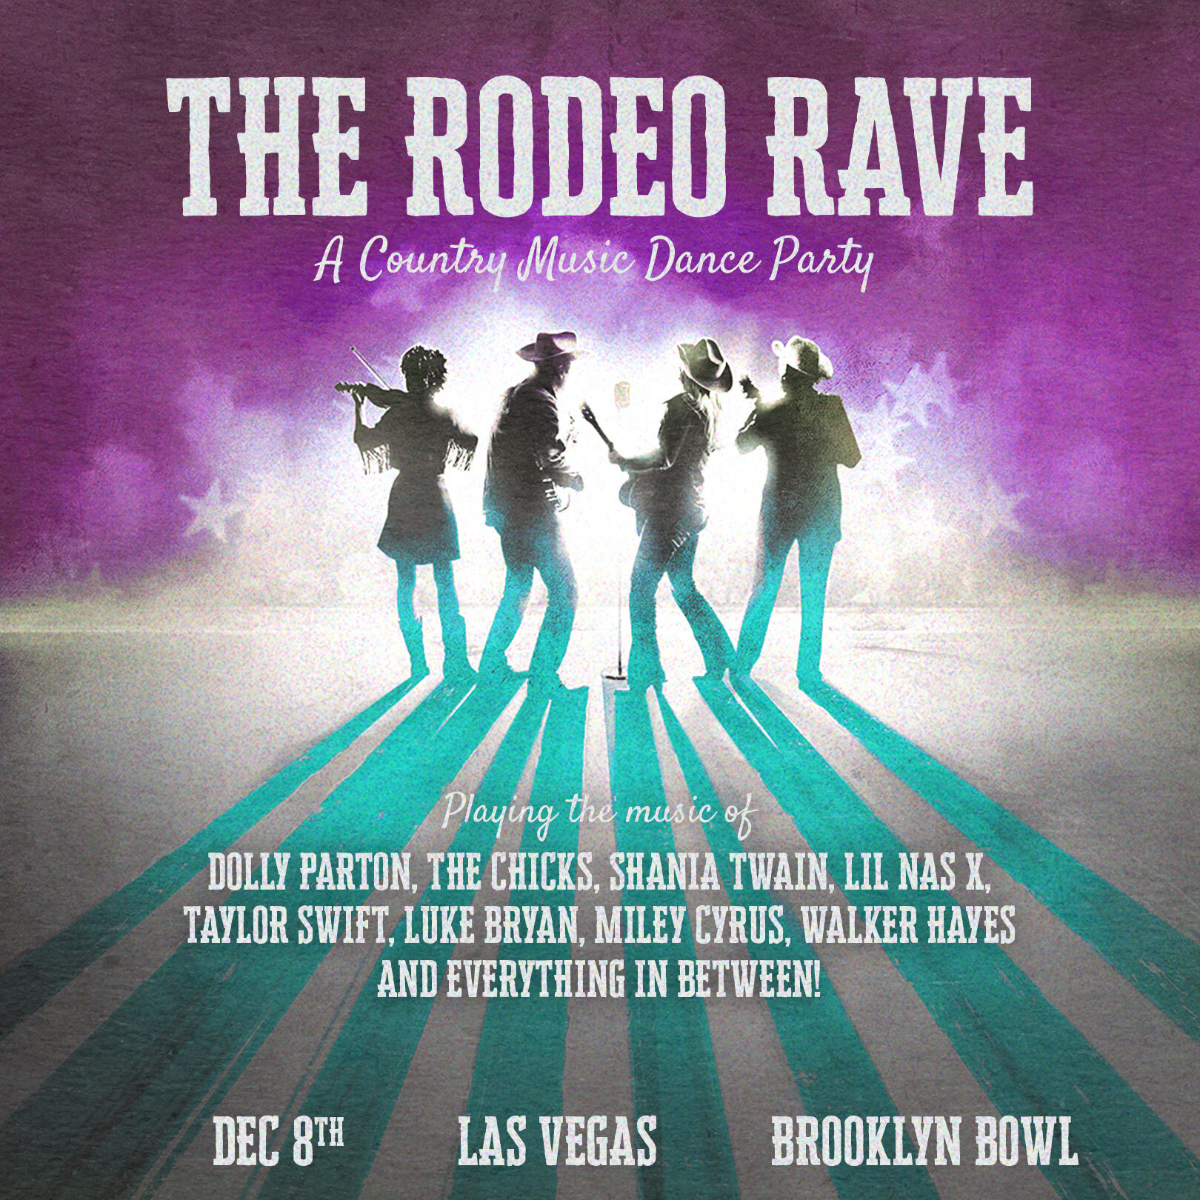 The Rodeo Rave